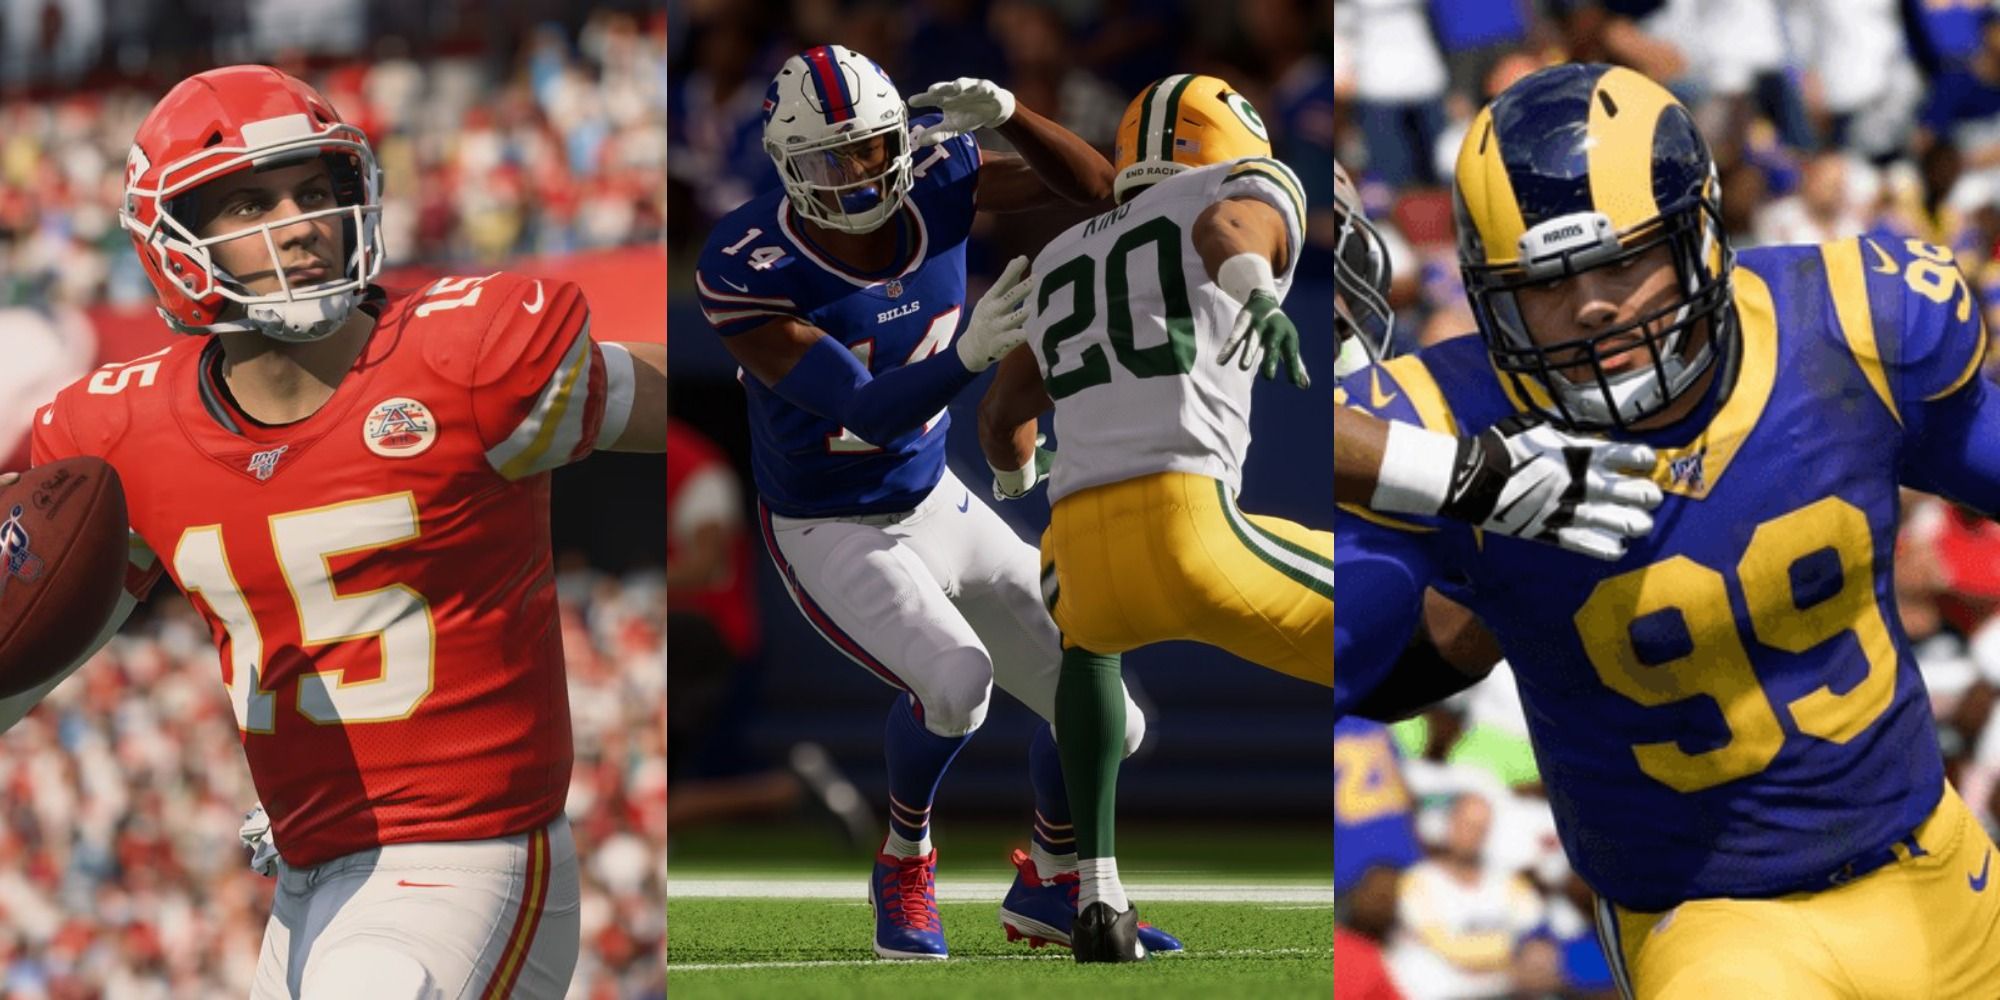 Madden NFL 22: The 10 Highest Rated Players